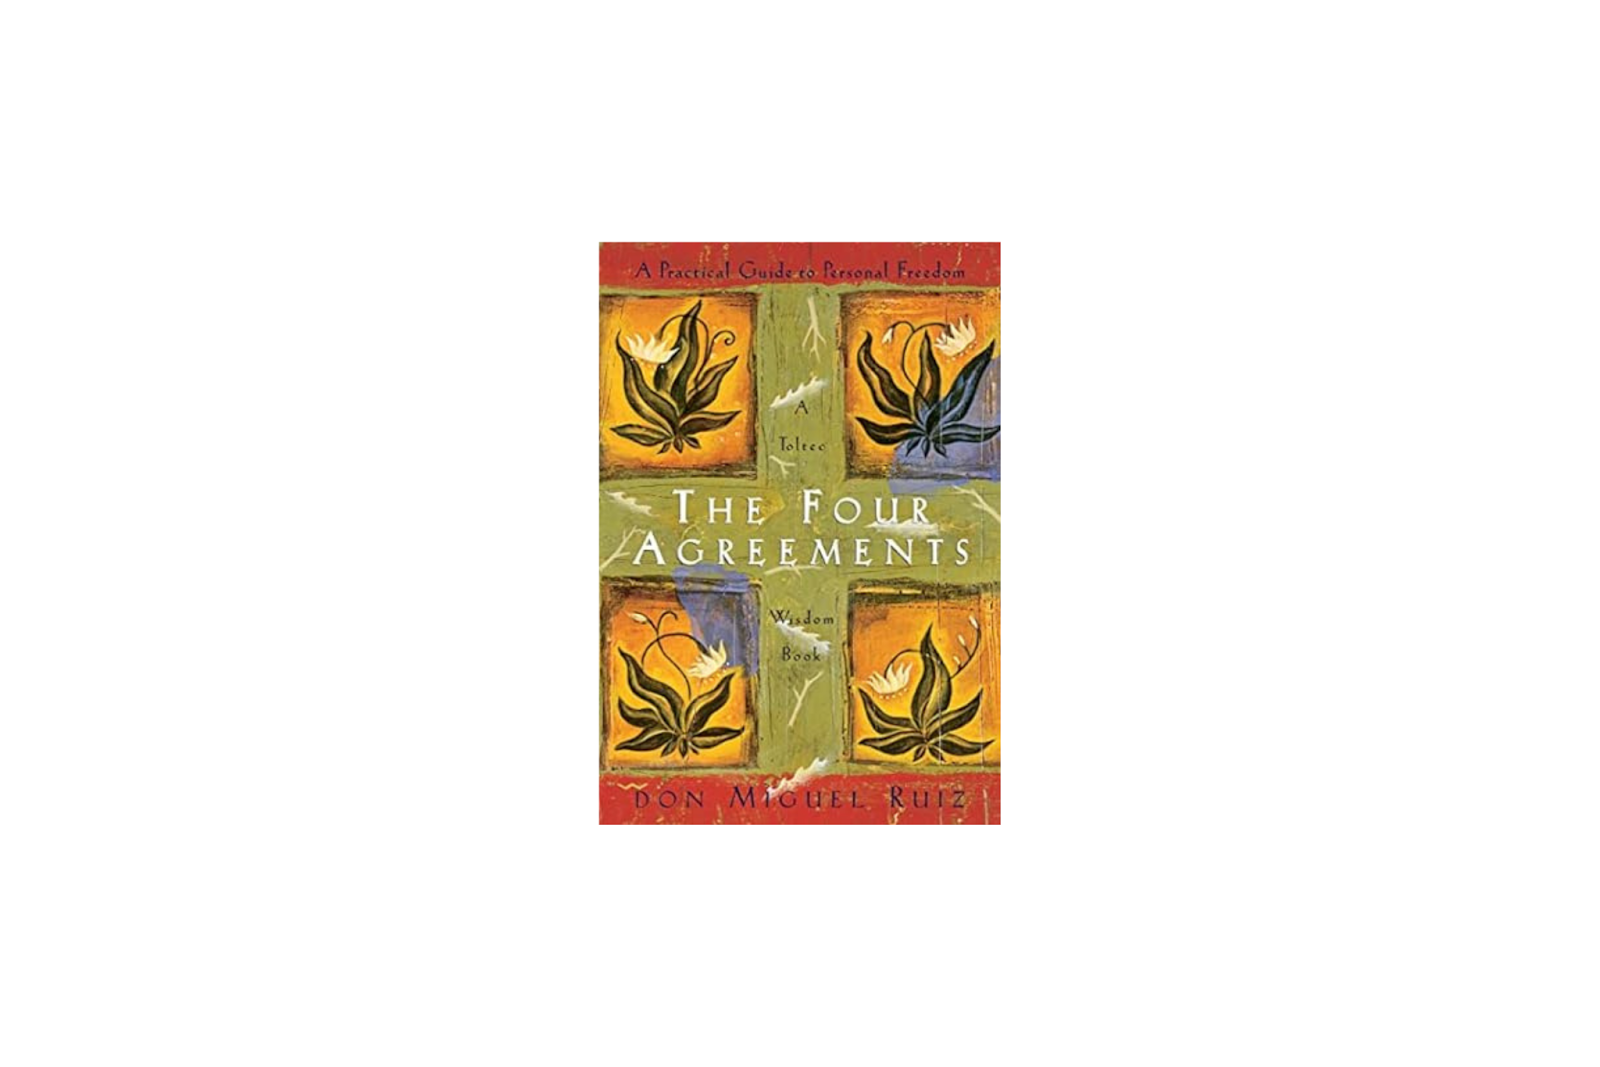 The Four Agreements by A Personal Guide to Personal Freedom by Don Miguel Ruiz.